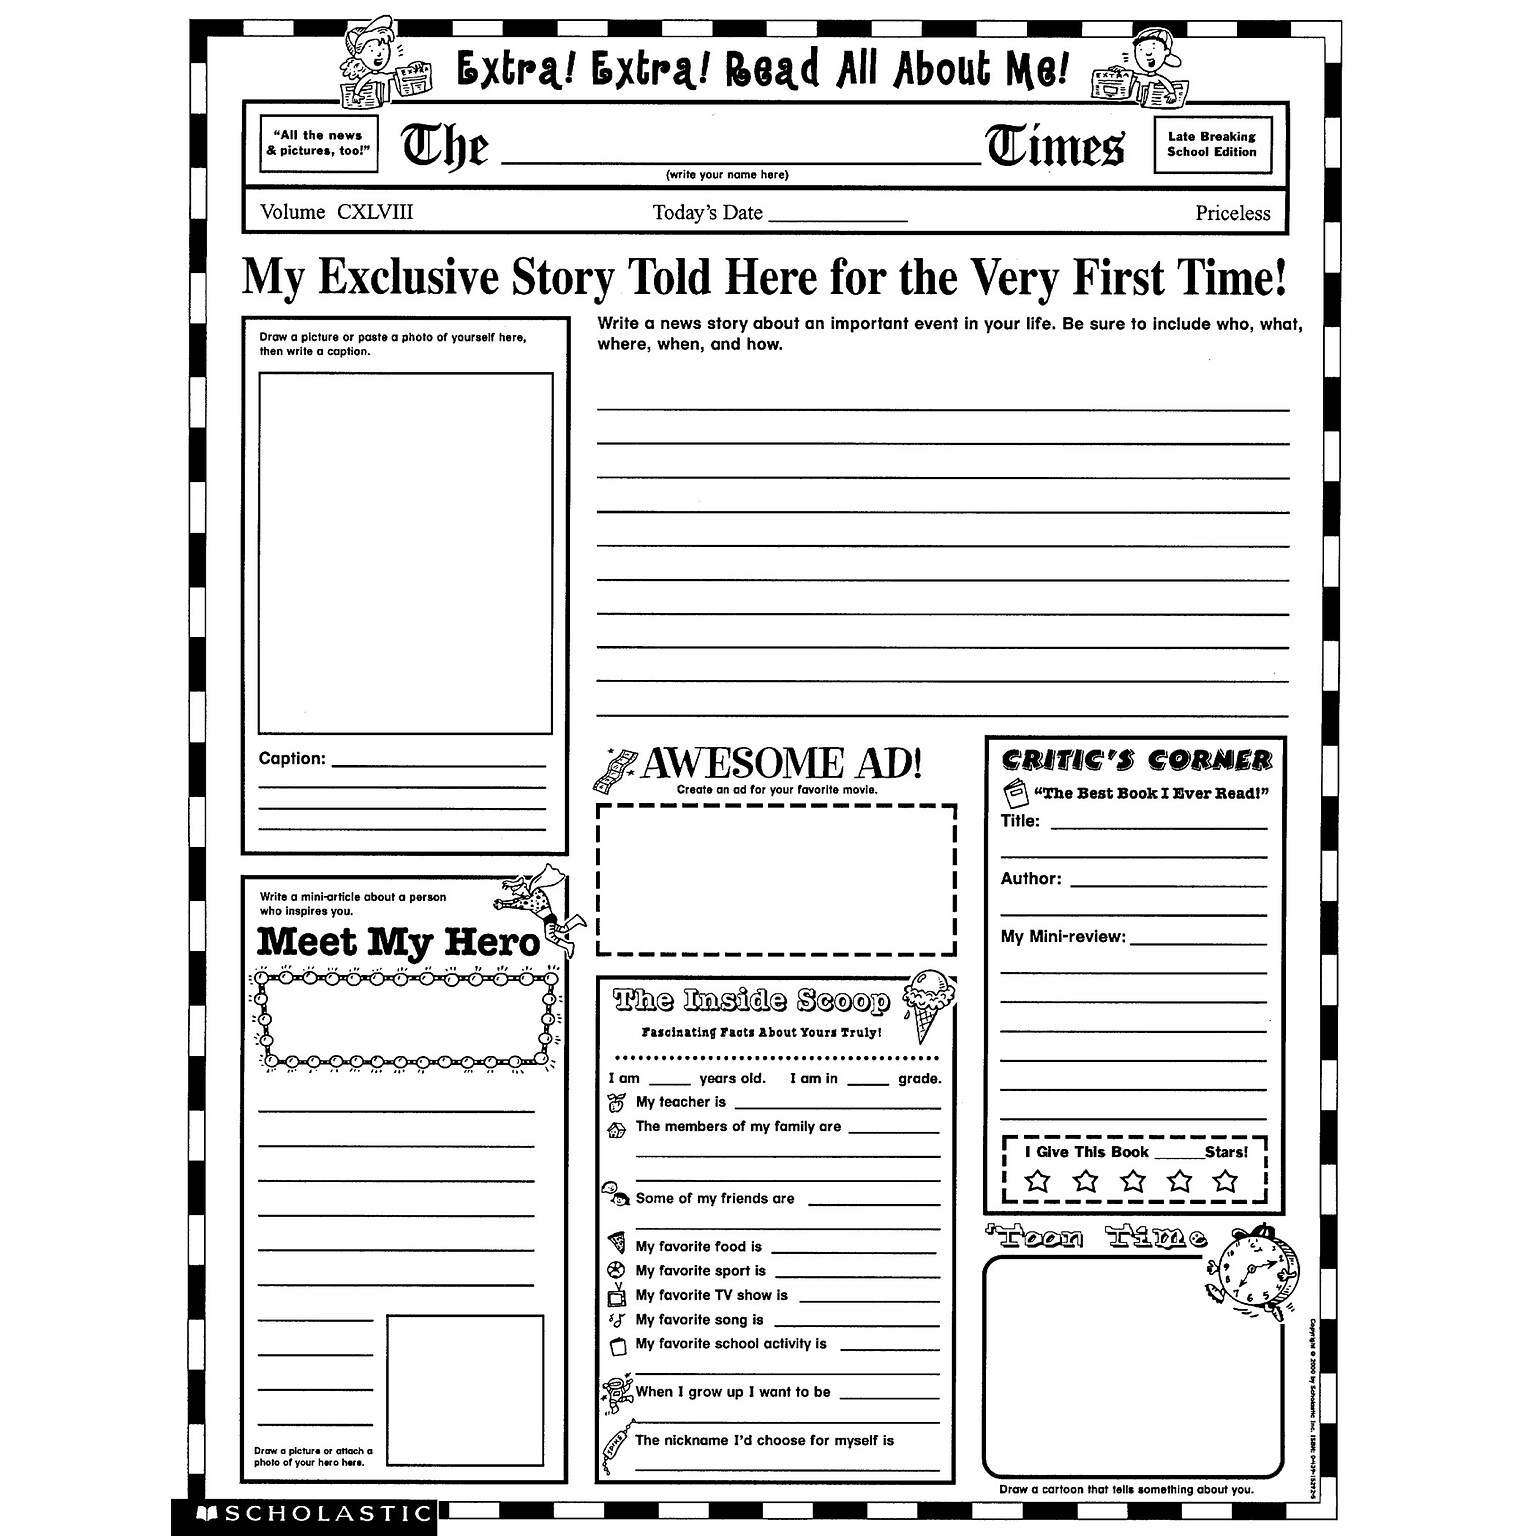 Scholastic Writing Resources, Personal Poster Sets, 17x22 (SC-0439152917)